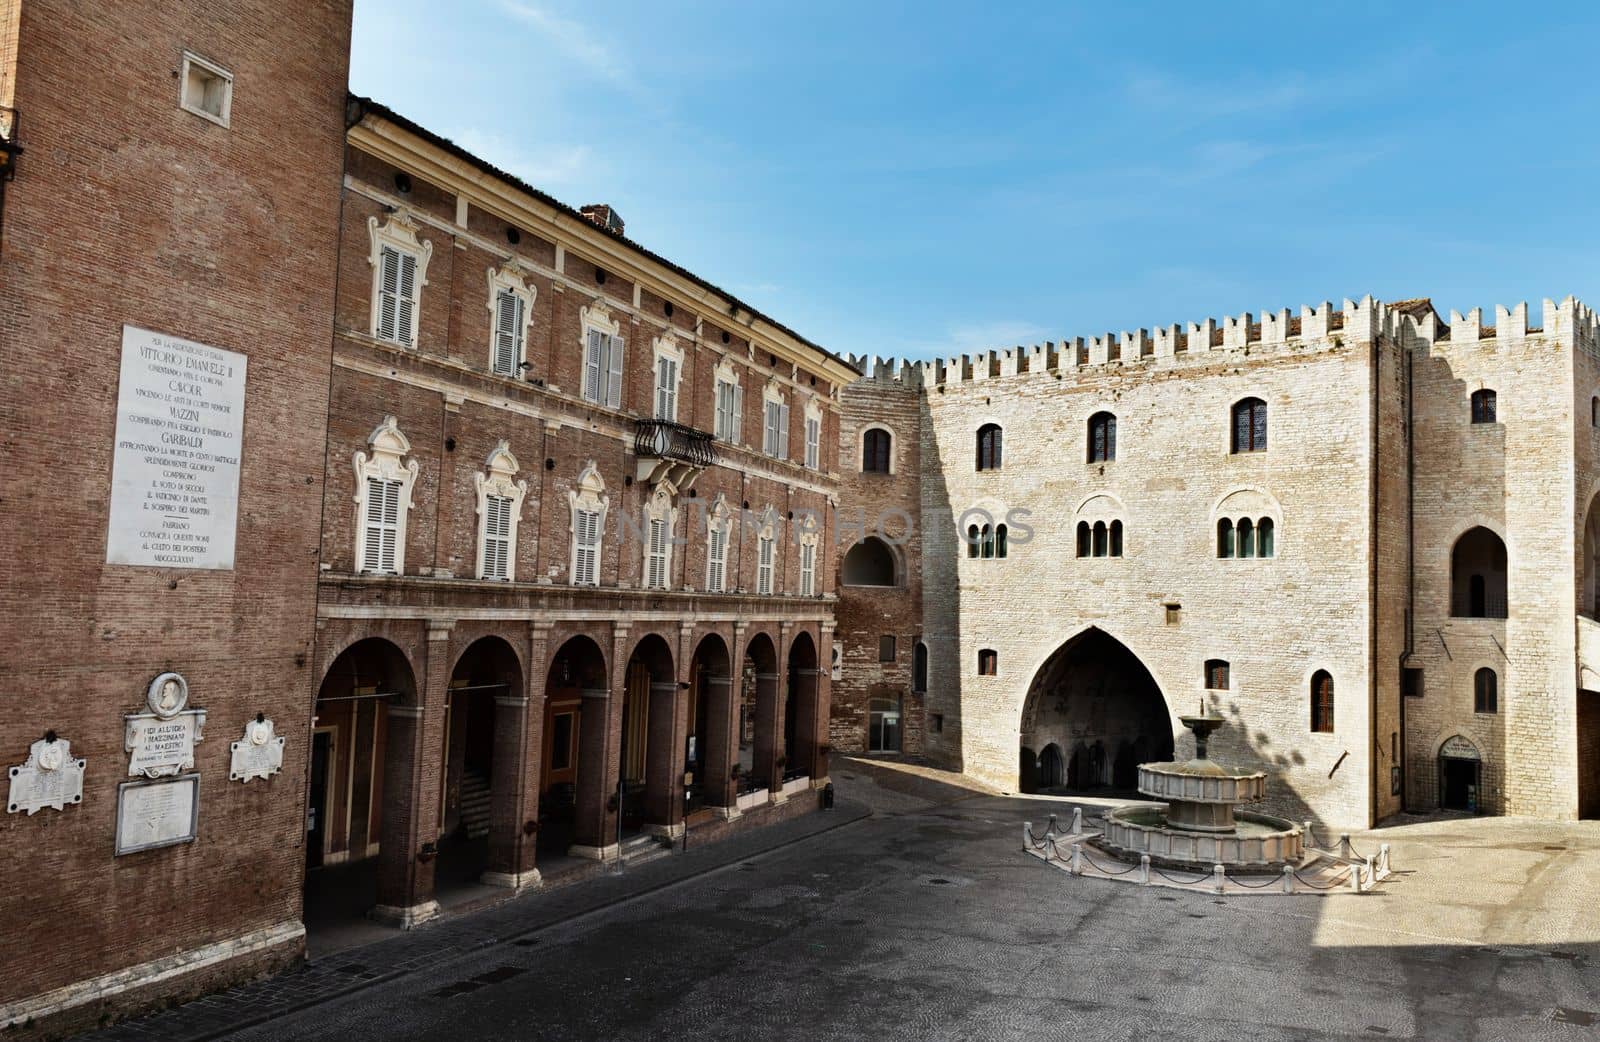 Fabriano ,Italy , Piazza del comune with gothic Palazzo del Podestà with swallow-tail battlements , Sturinalto Fountain and Vescovile Palace with Torre Civica